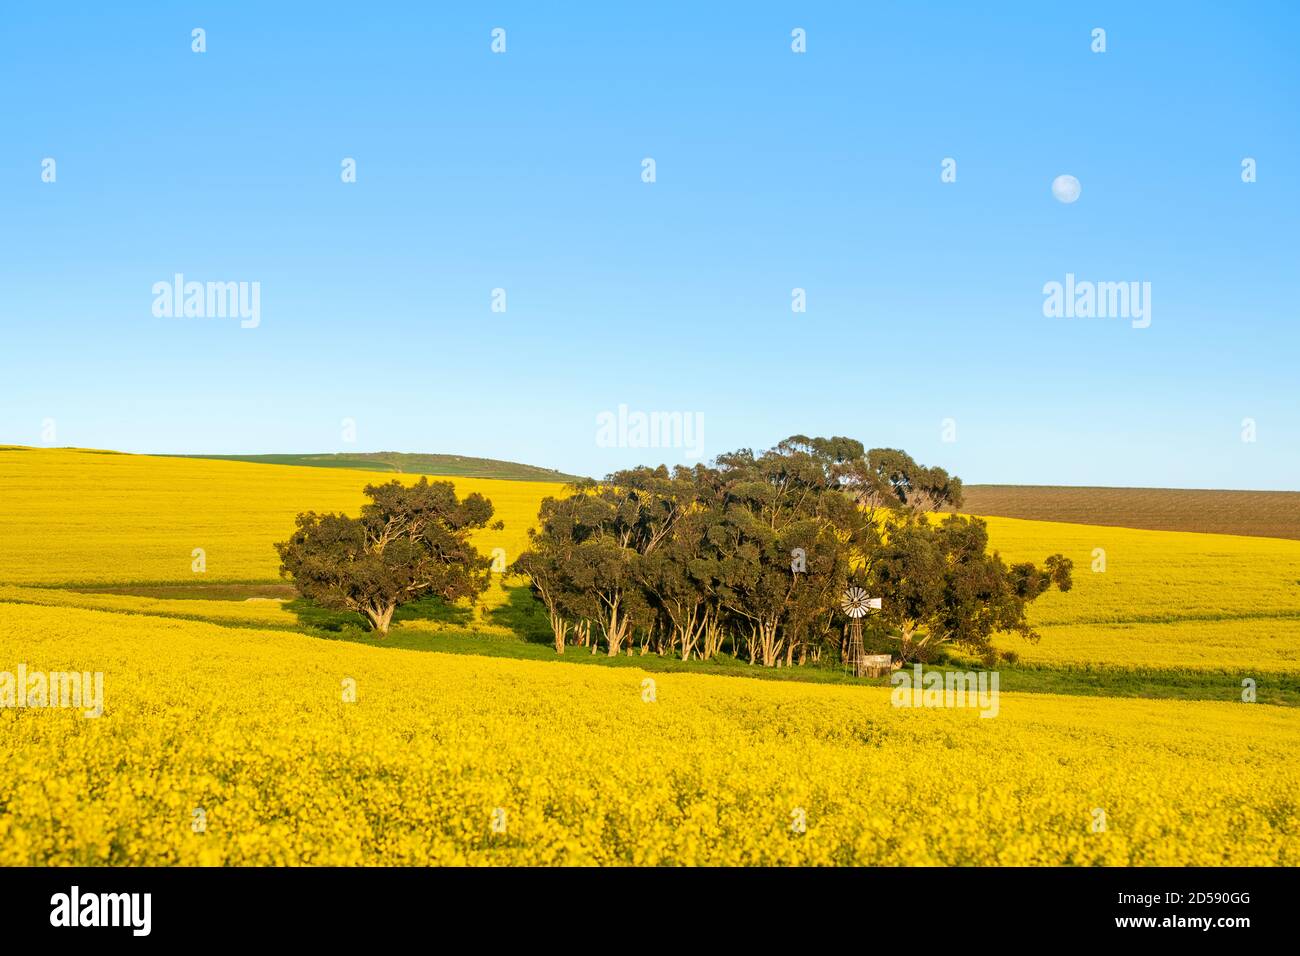 American-style windmill next to gum trees in a canola field, Western Cape, South Africa Stock Photo